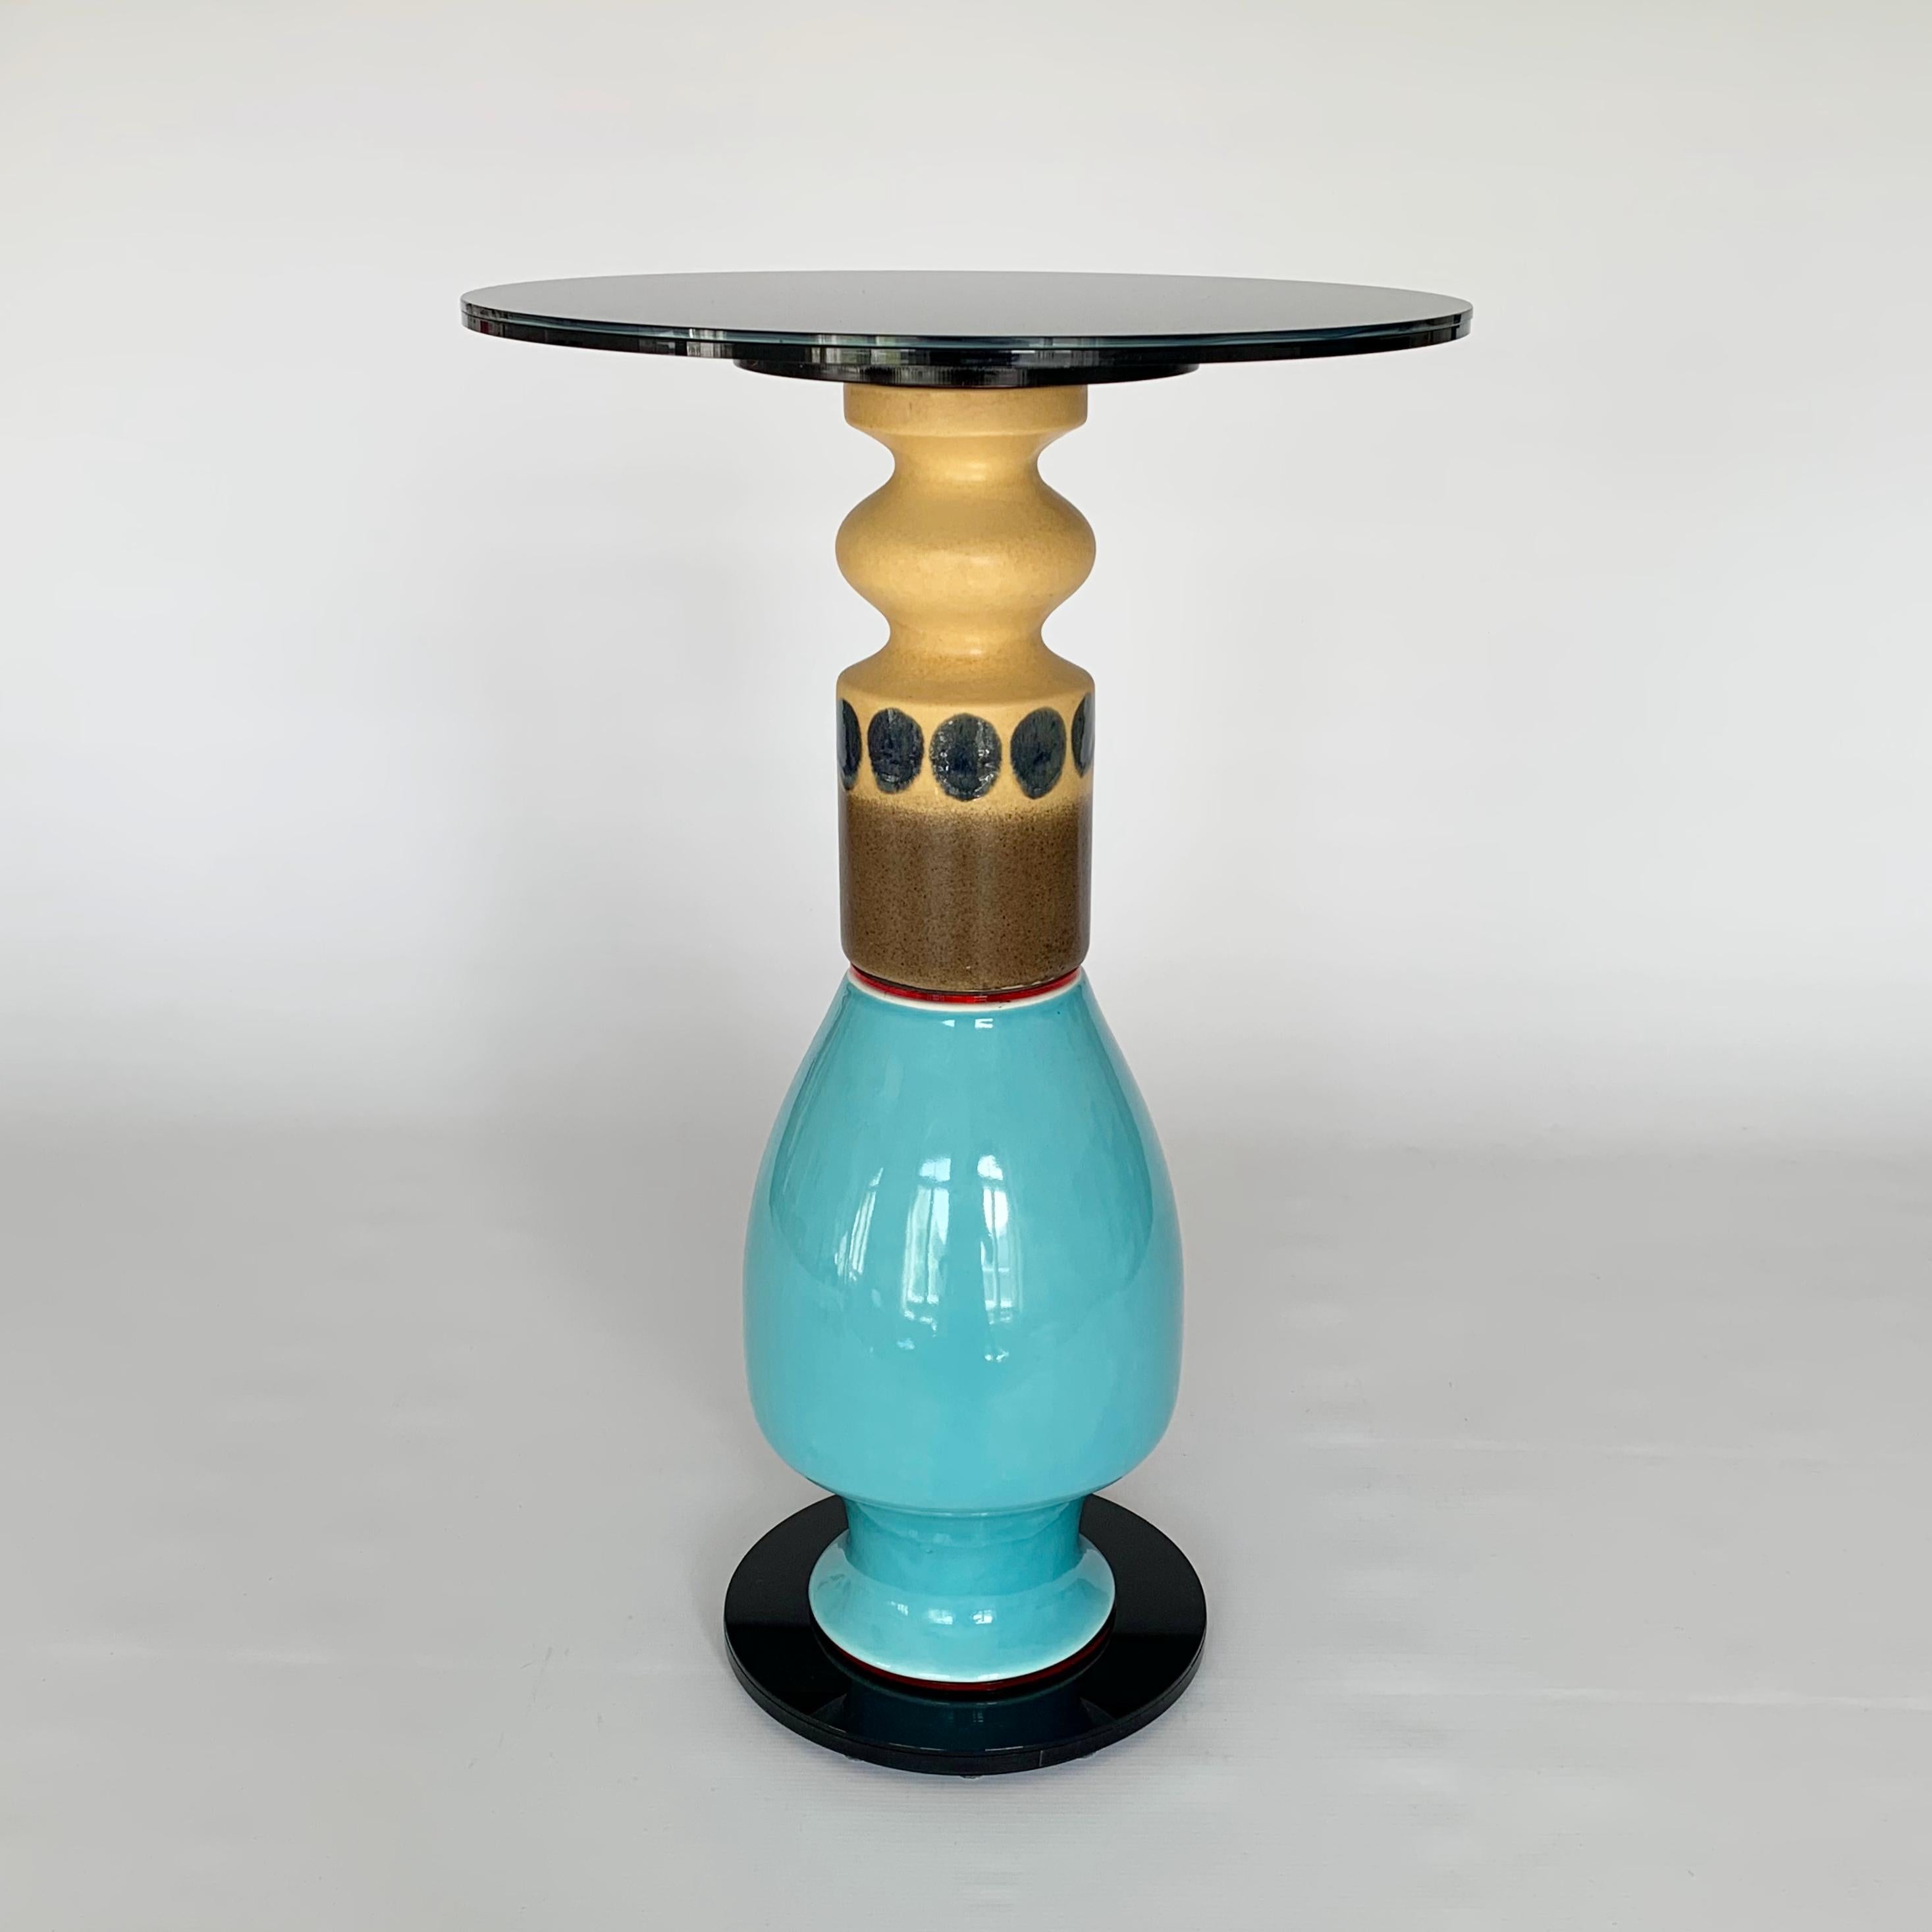 Designer and Artis Andreas Berlin created a collection of extraordinary side tables. This tables are sculptures and high end useful upcycling tables. The vases found in antiquarian stores become a new life as a segment of a sculpture. A clever